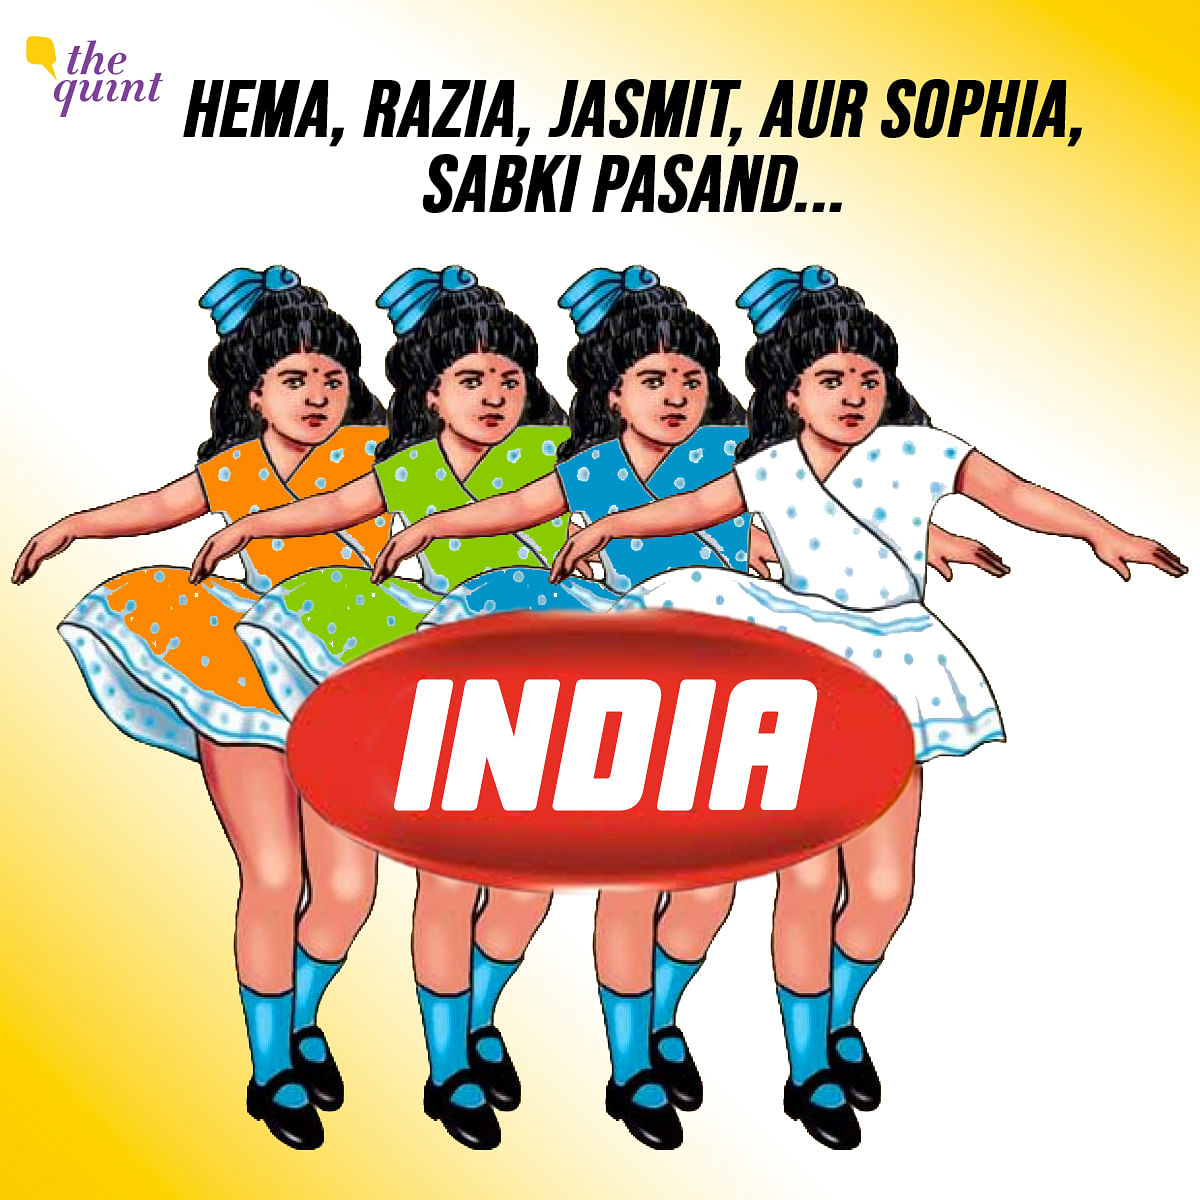 Remember your favourite ads from childhood? We recreate popular Indian ads to see how they connect to India today.